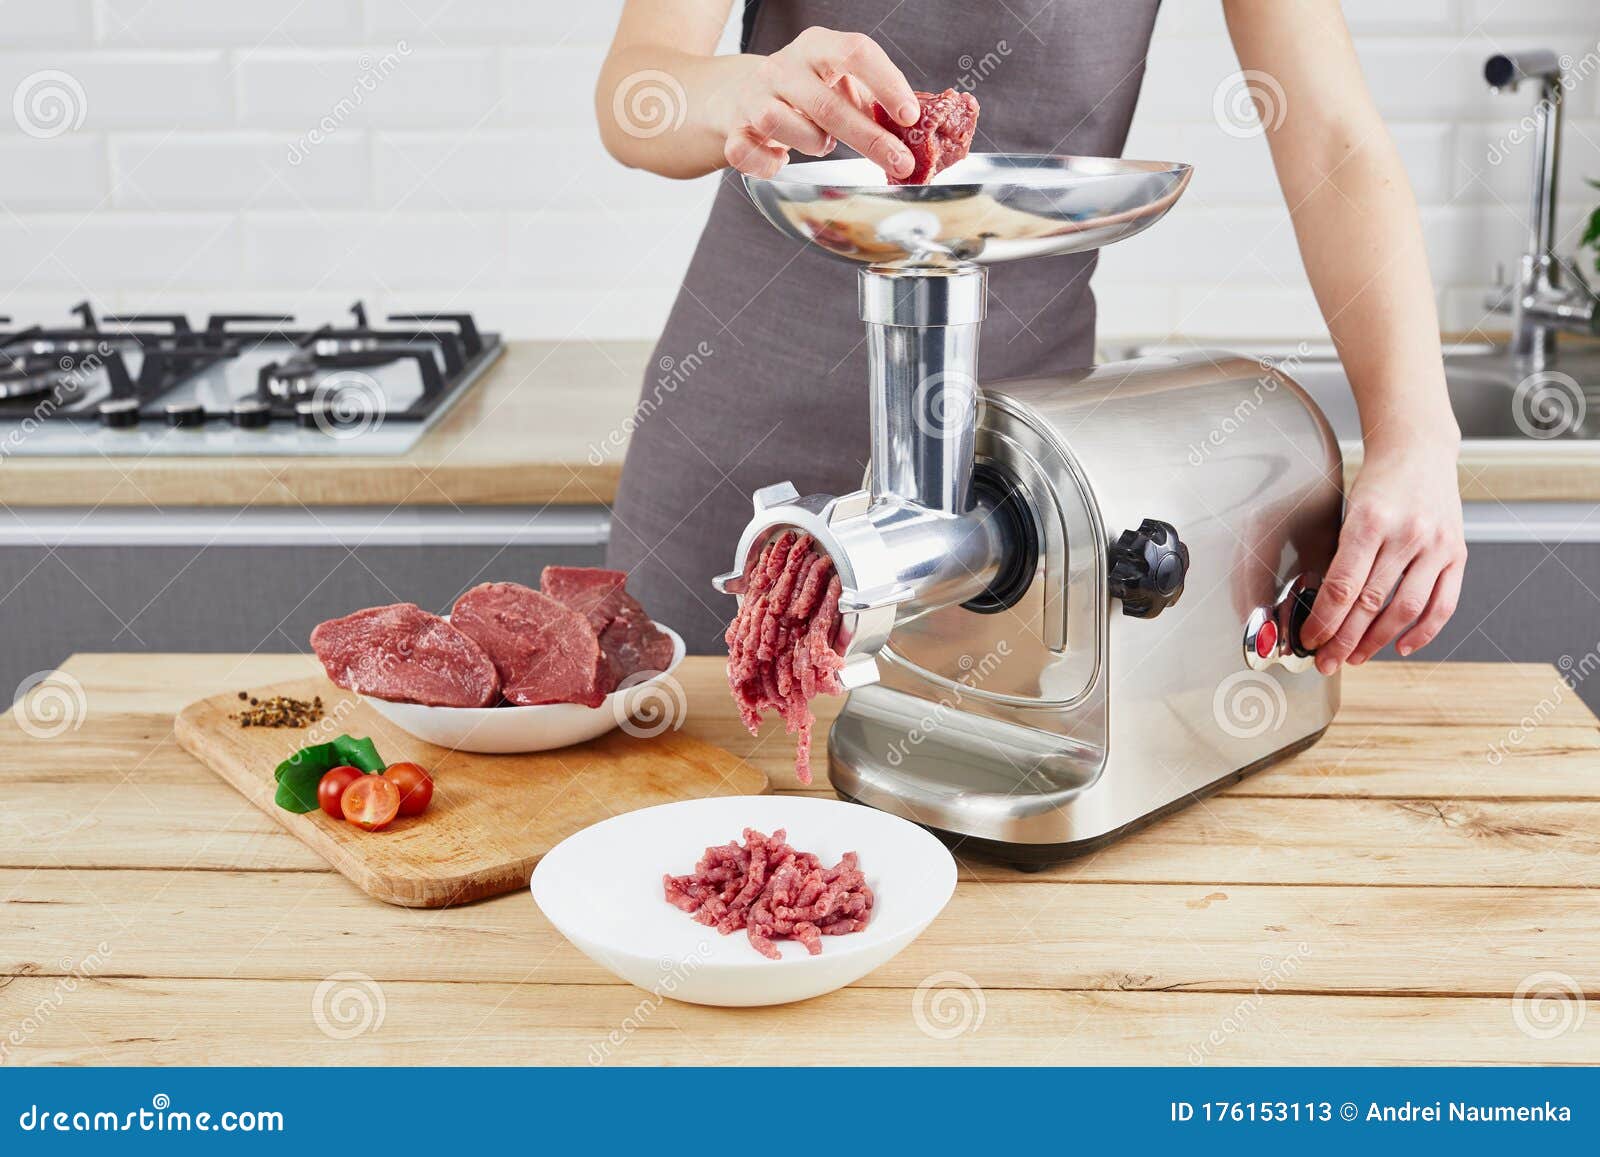 https://thumbs.dreamstime.com/z/process-preparing-forcemeat-means-meat-grinder-female-hands-use-meat-chopper-kitchen-raw-meat-process-176153113.jpg